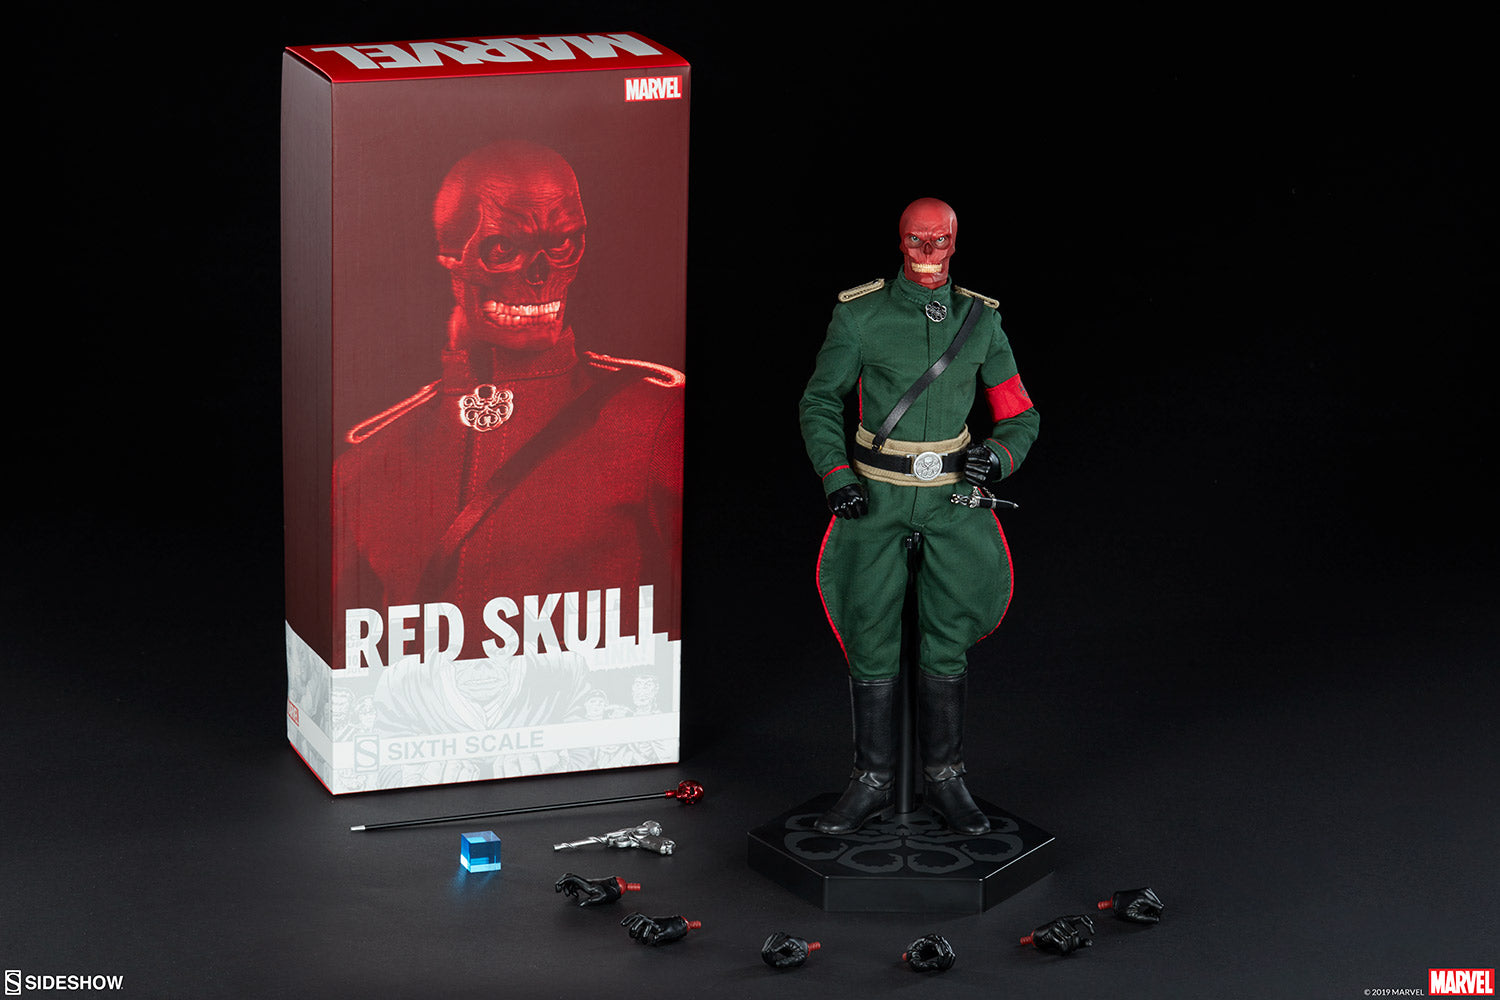 Sideshow exclusive Marvel Red Skull Sixth Scale Figure with accessories and packaging